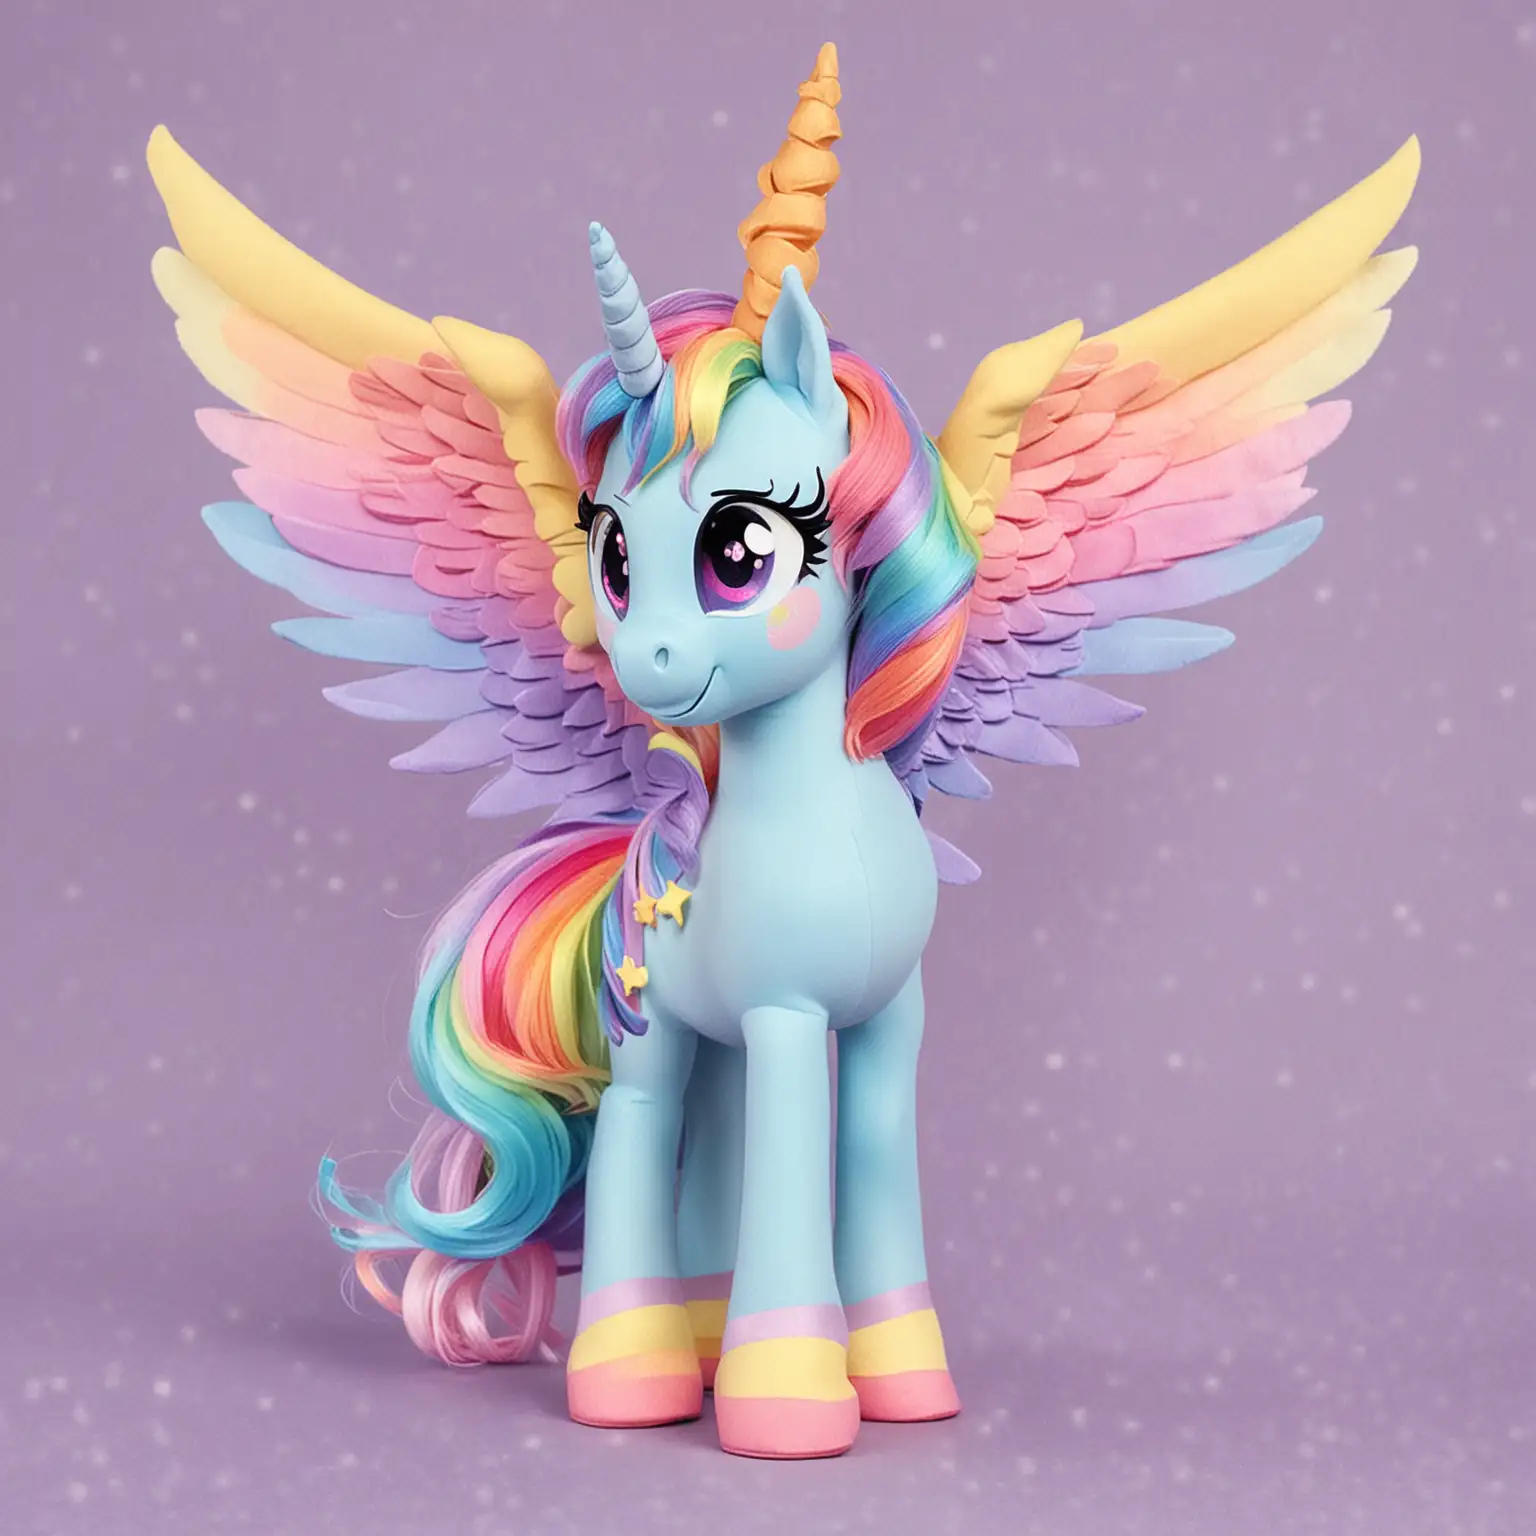 Pastel Rainbow My Little Pony with Unicorn Horn and Wings